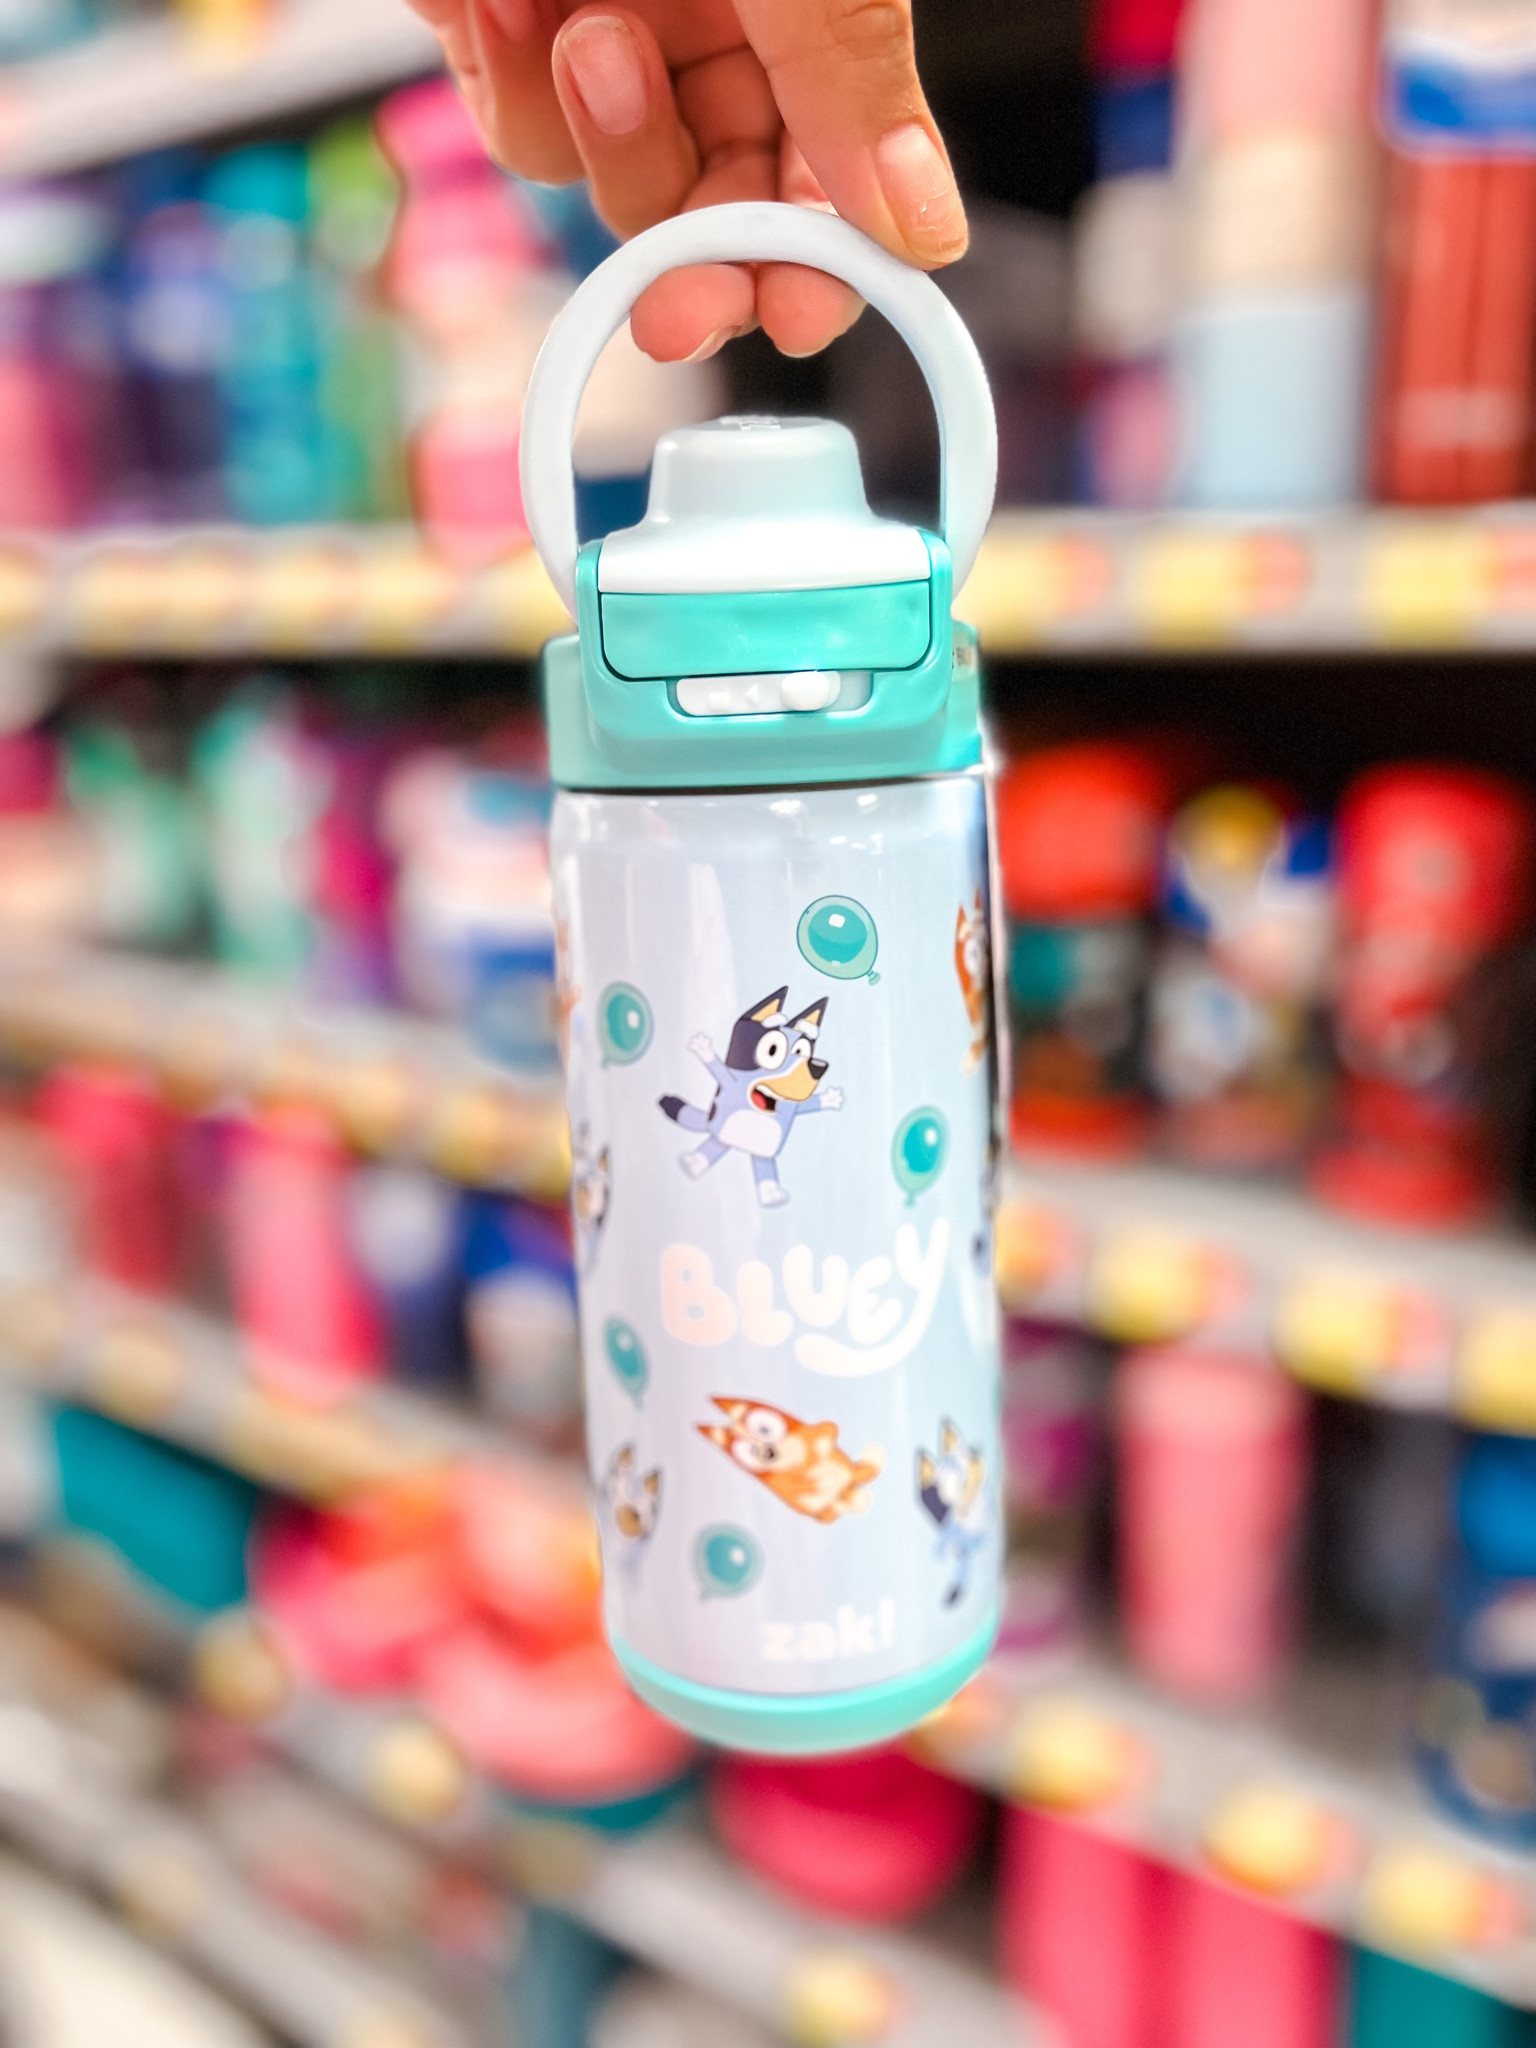 Zak Designs 14oz Stainless Steel Kids' Water Bottle with Antimicrobial Spout 'Paw Patrol